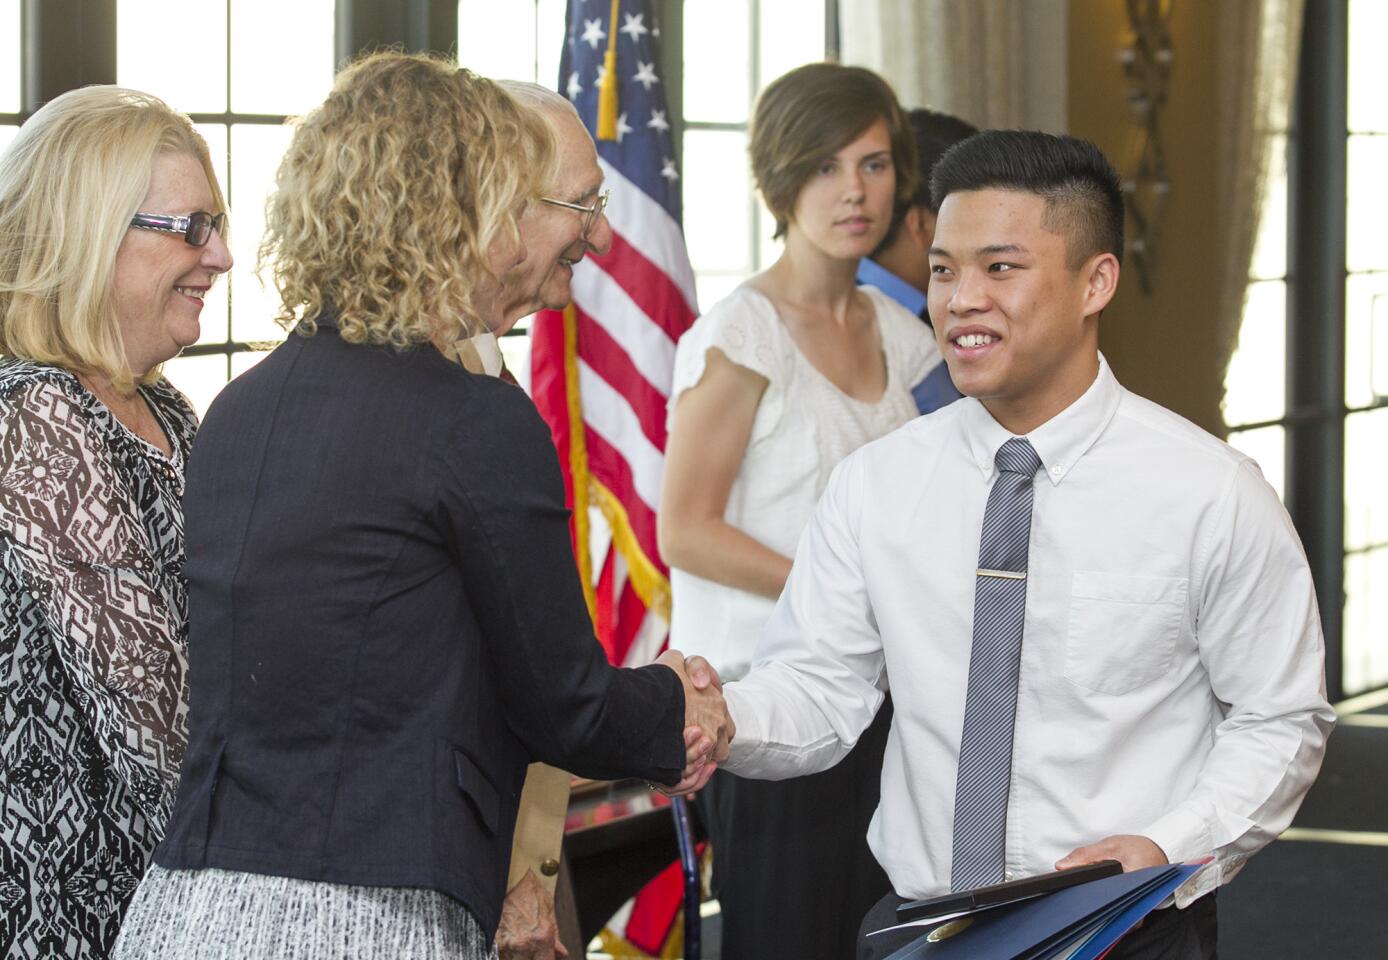 Estancia High School's Thanh Nugyen shakes hands with Katrina Foley during the 35th annual Scholarship Recognition Breakfast, hosted by the Costa Mesa Chamber of Commerce on Friday, May 16. He received the Les Miller Outstanding Student Award. (Scott Smeltzer - Daily Pilot)